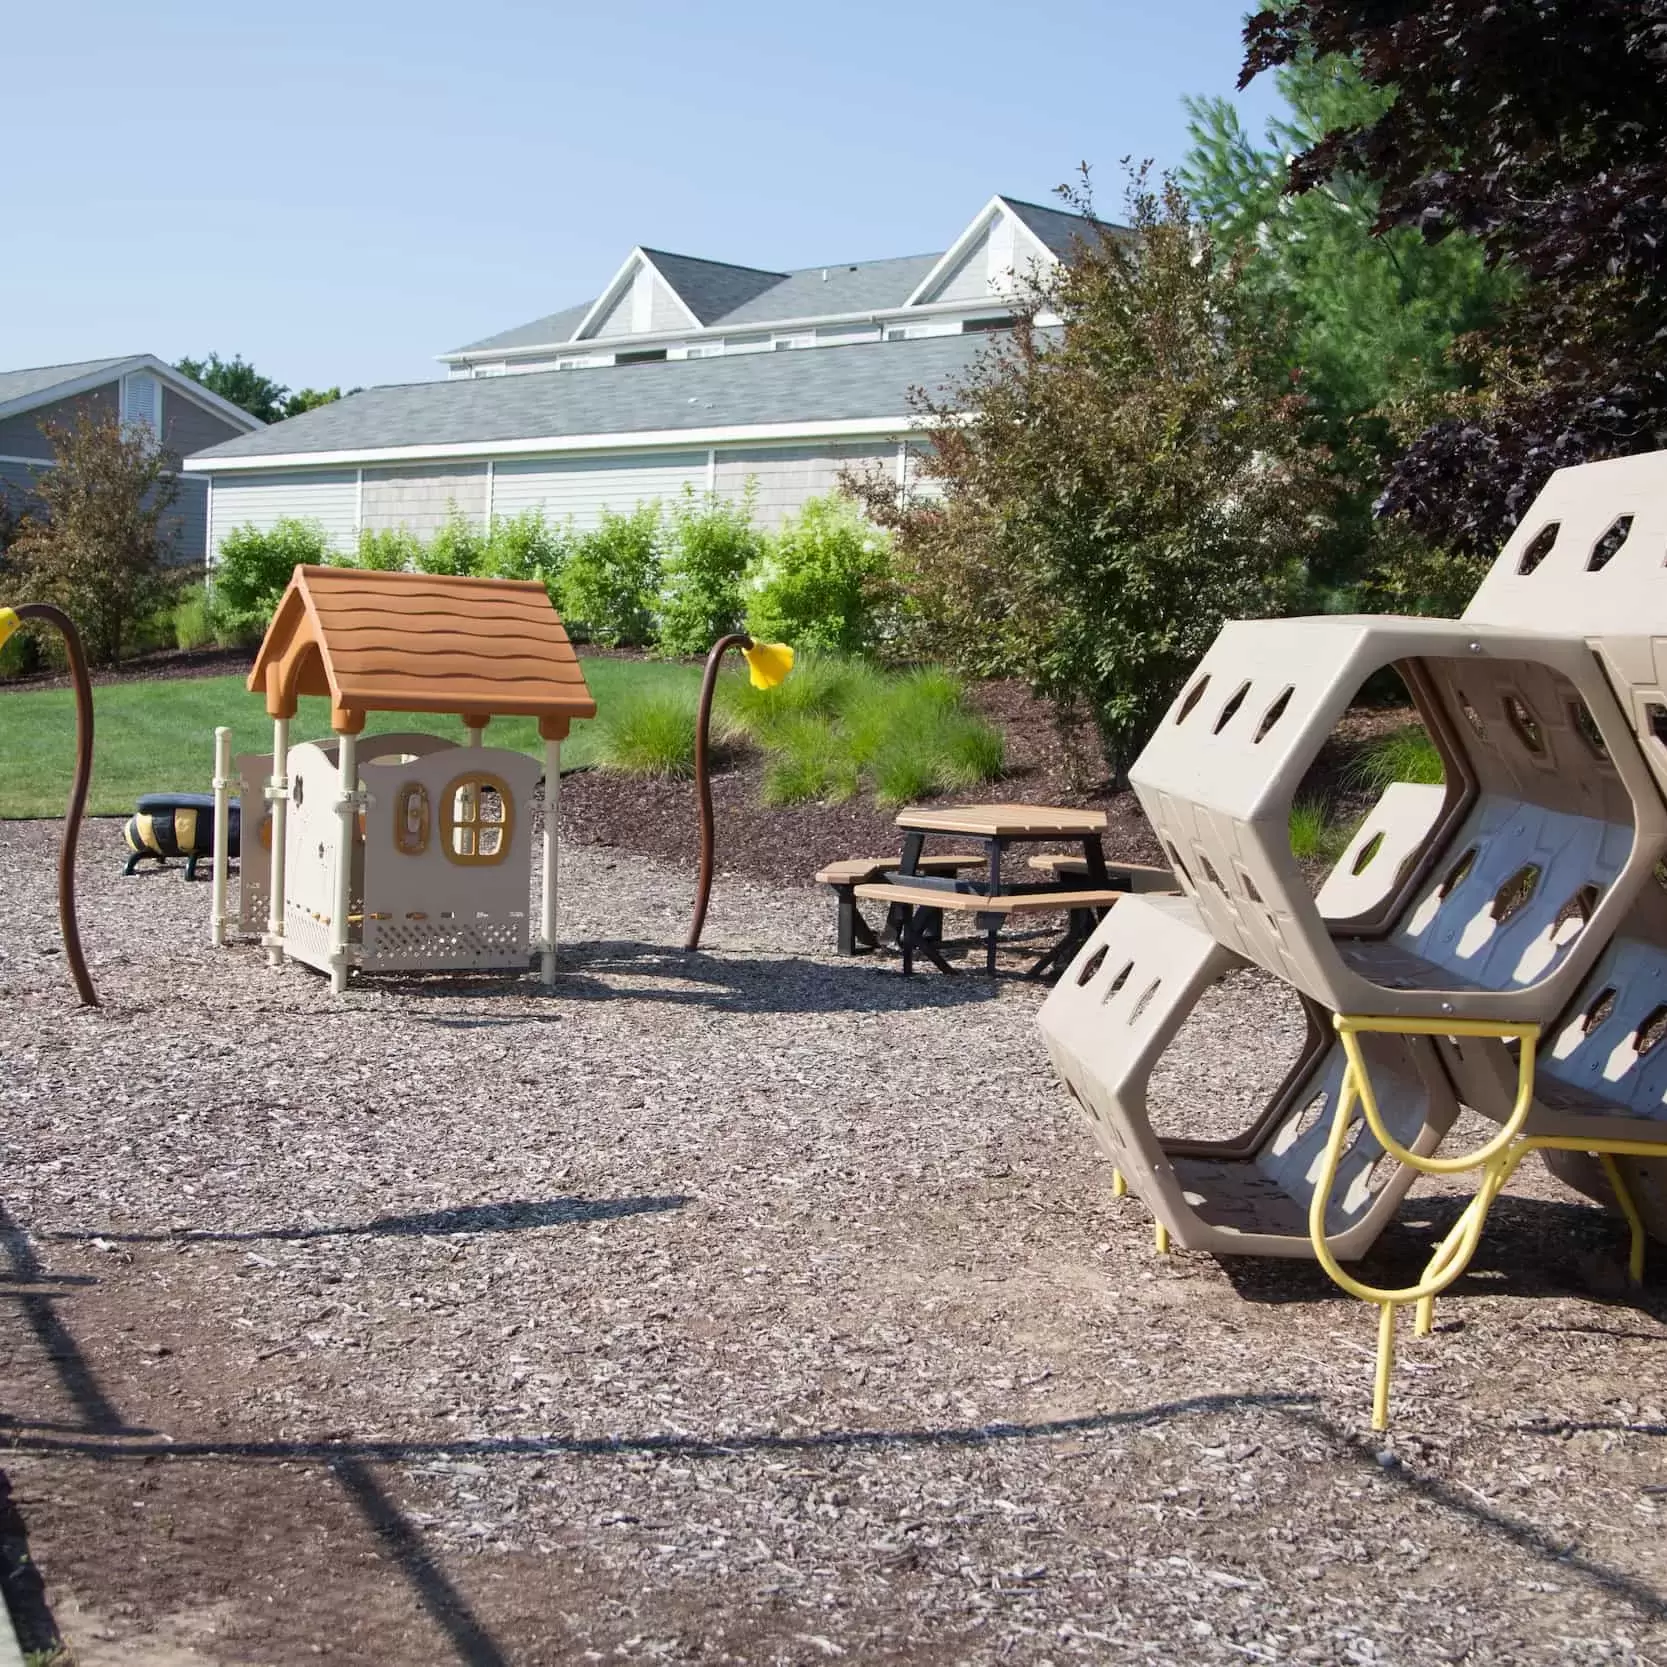 An outdoor play area for children has a picnic table, a play house, and a climbing structure.